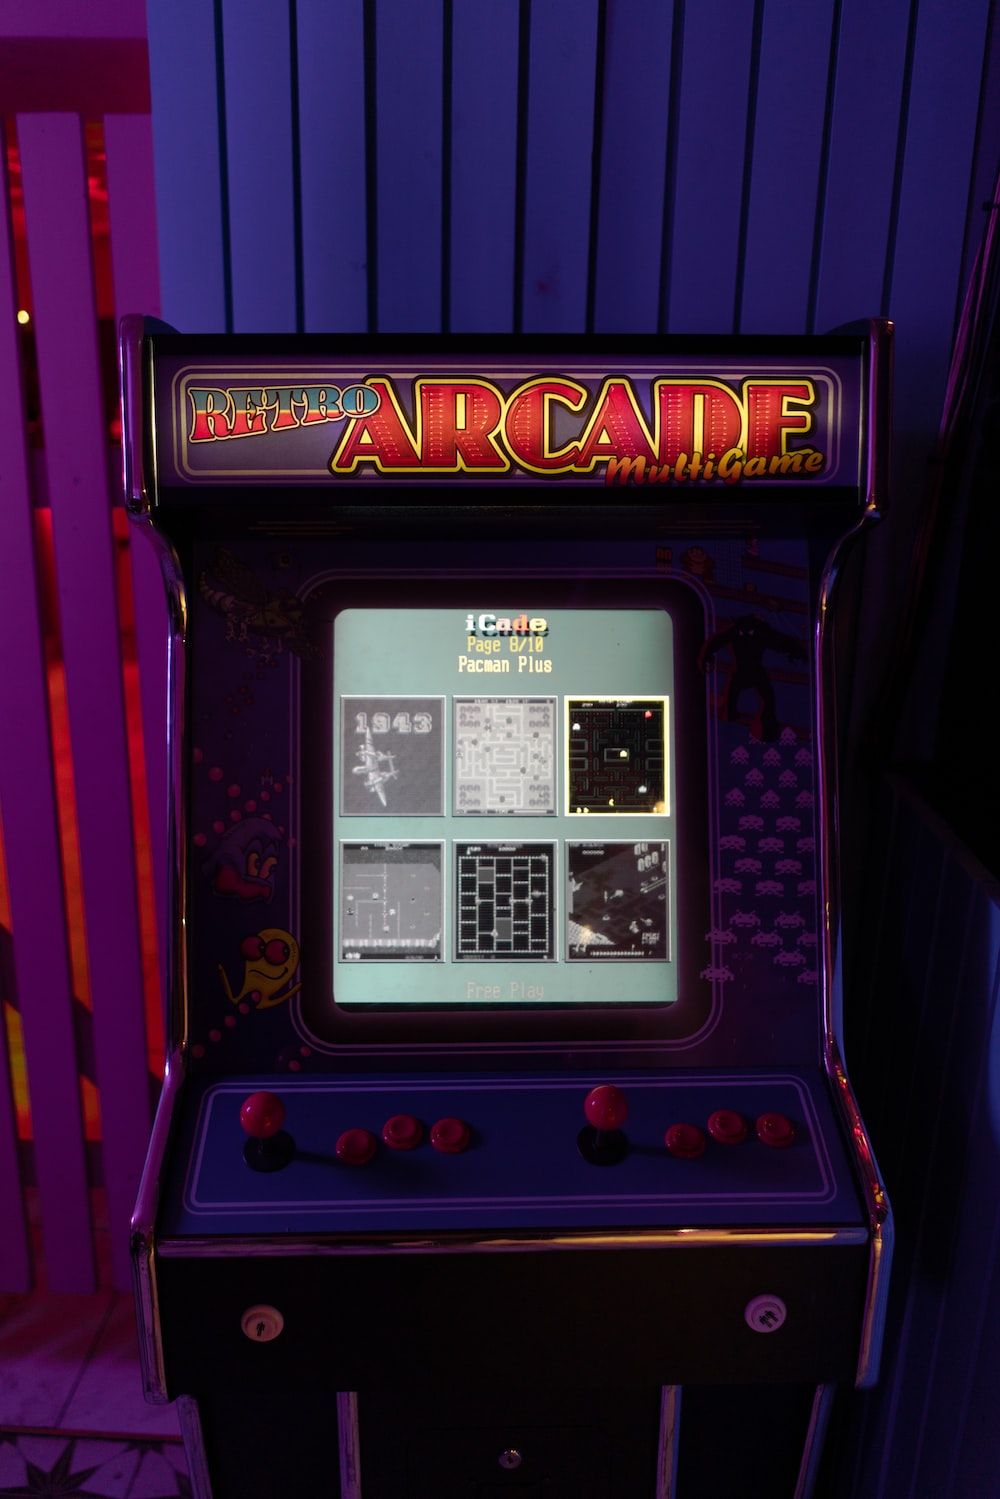 Arcade Game Machine Picture. Download Free Image